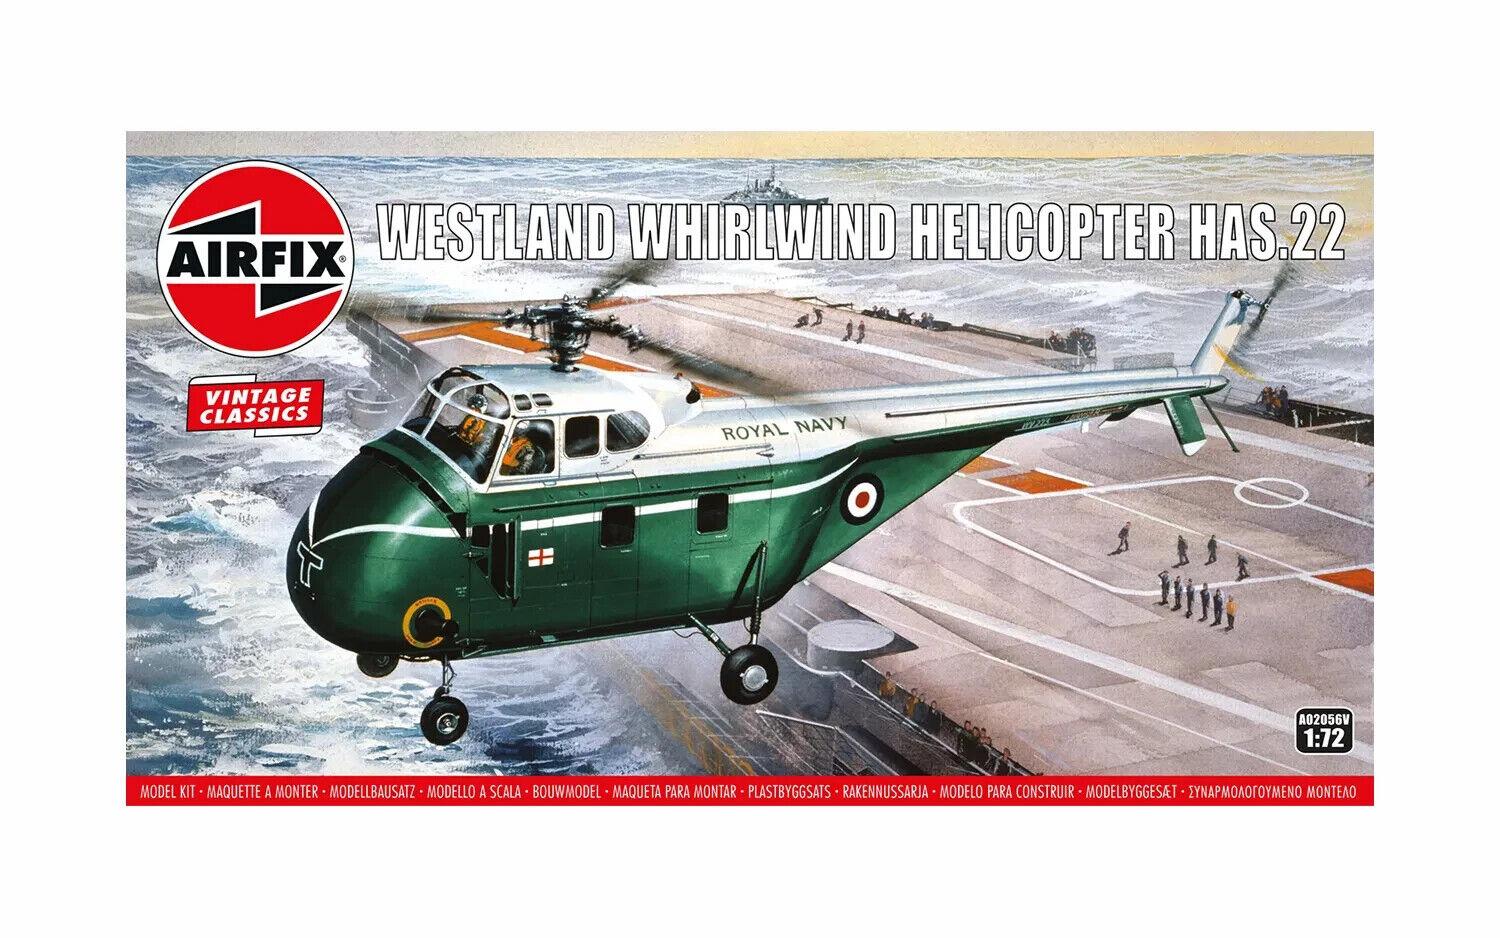 Airfix WESTLAND WHIRLWIND HELICOPTER